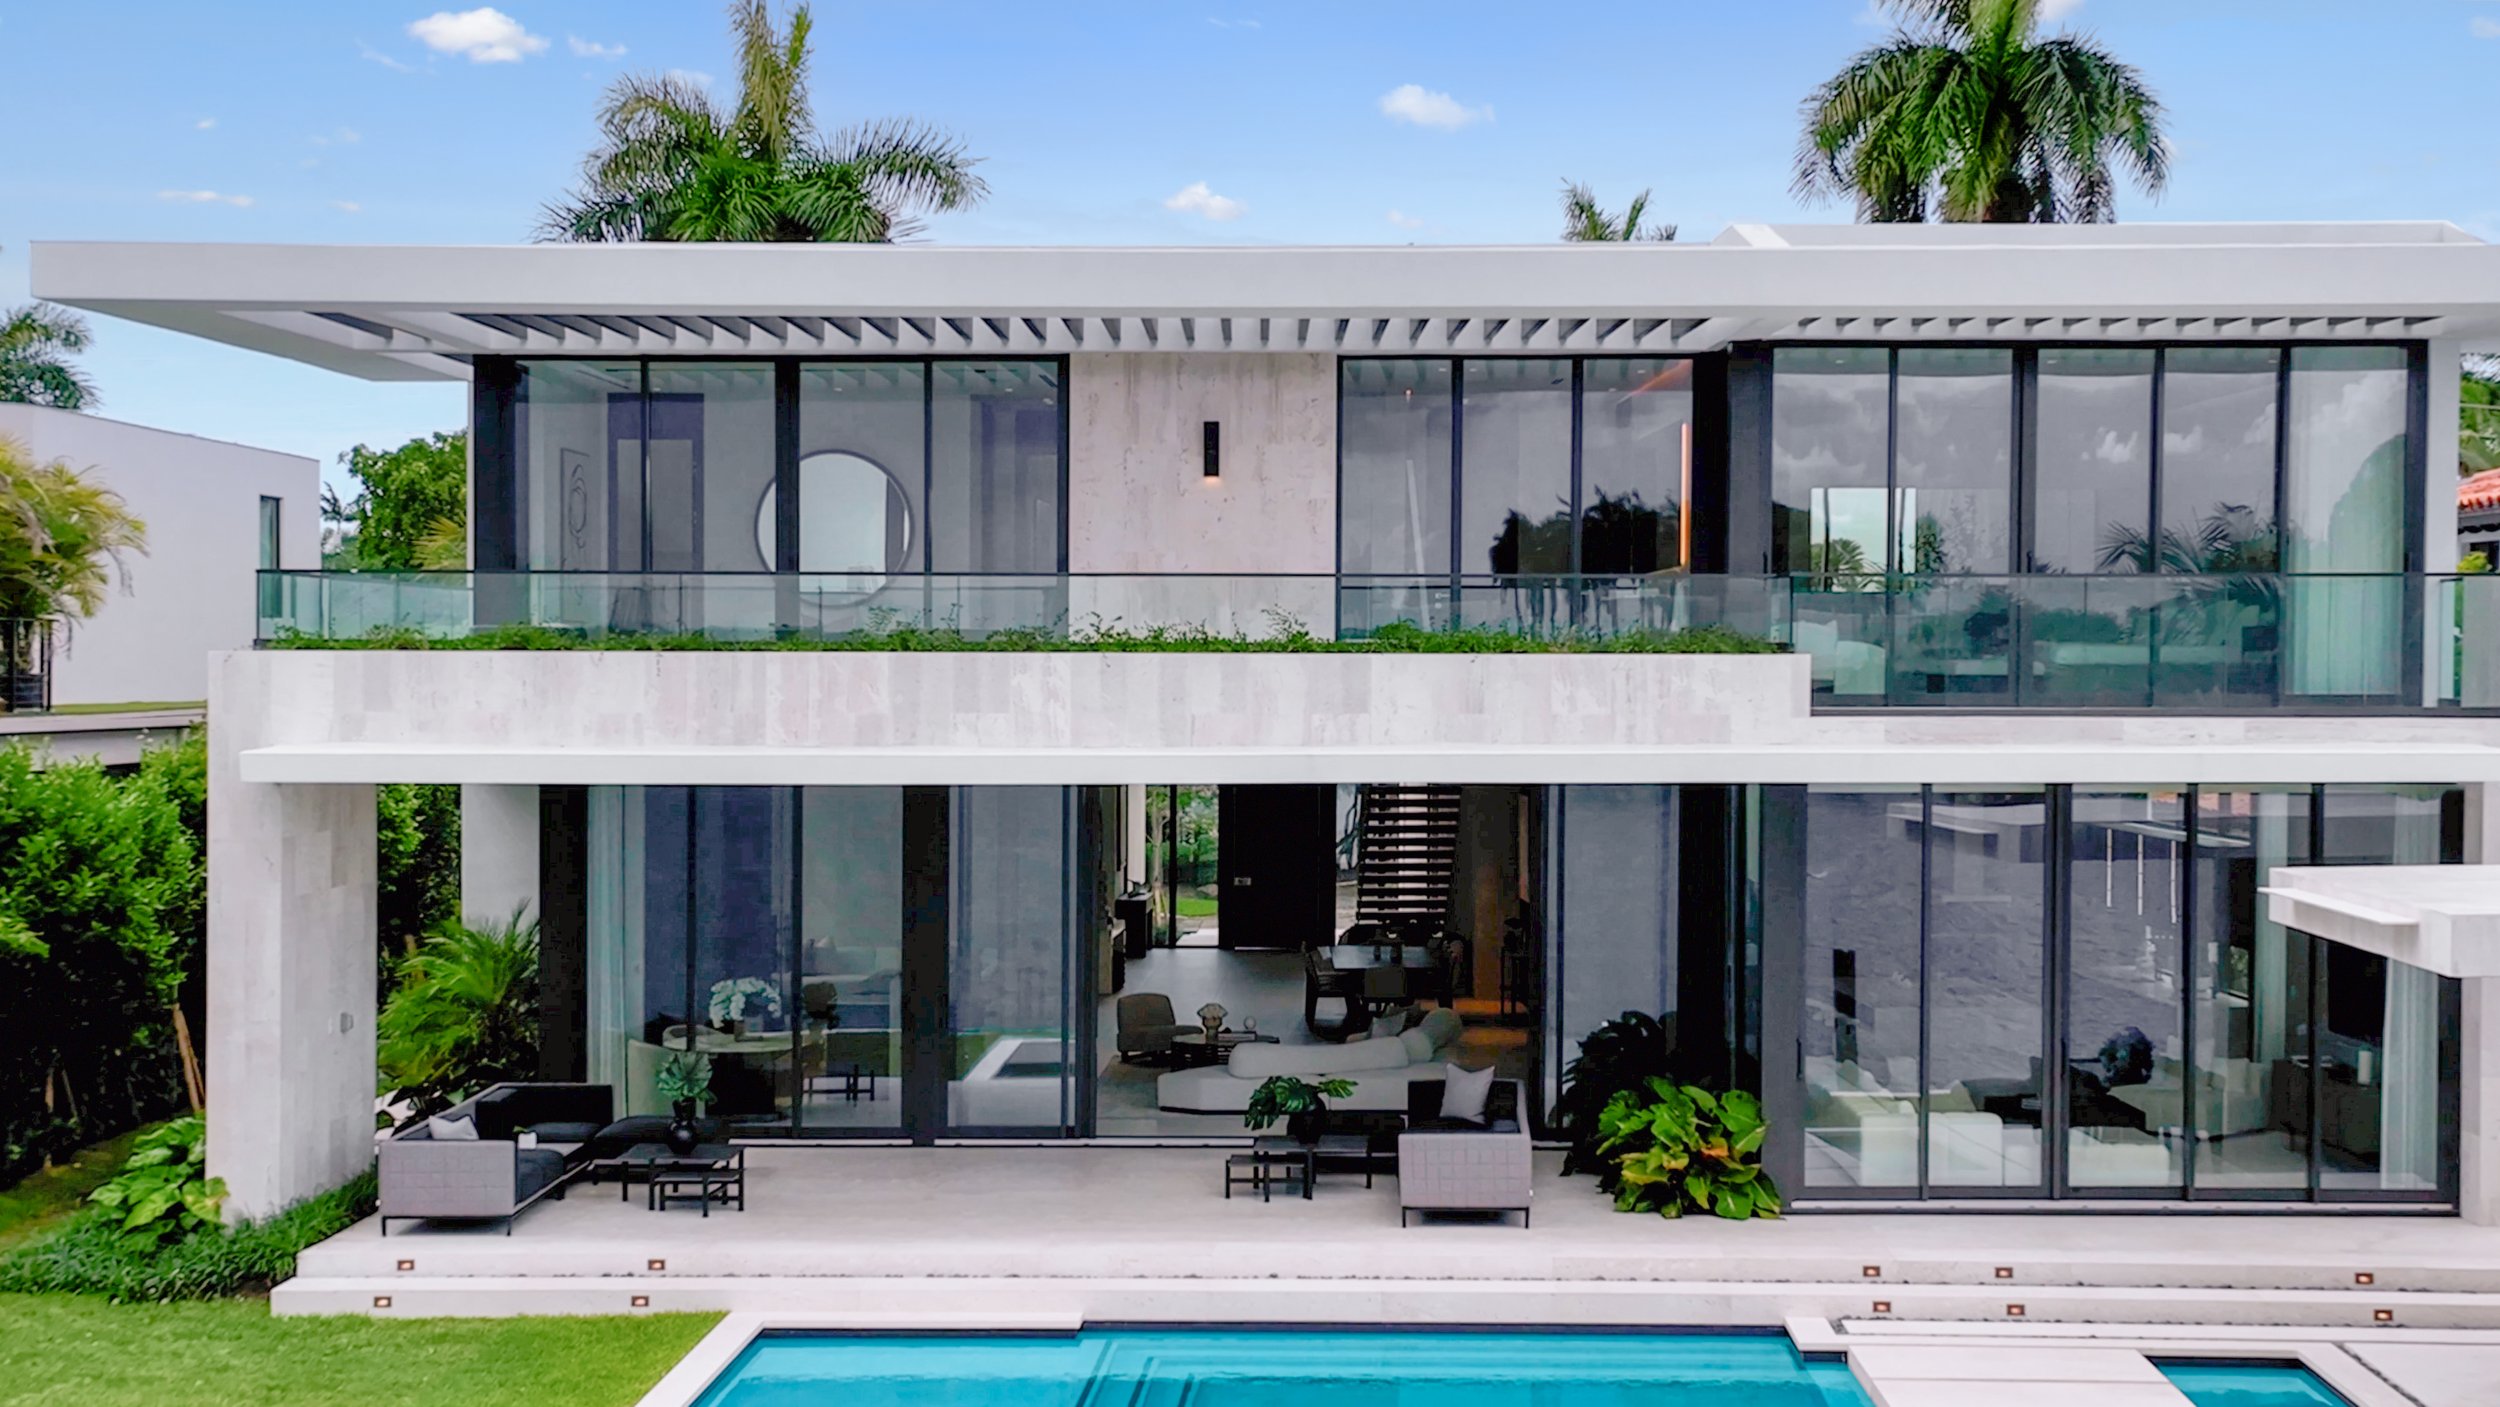 Check Out The Tropical Modern Waterfront On Bay Harbor Islands Asking $22.95 Million 1.JPG